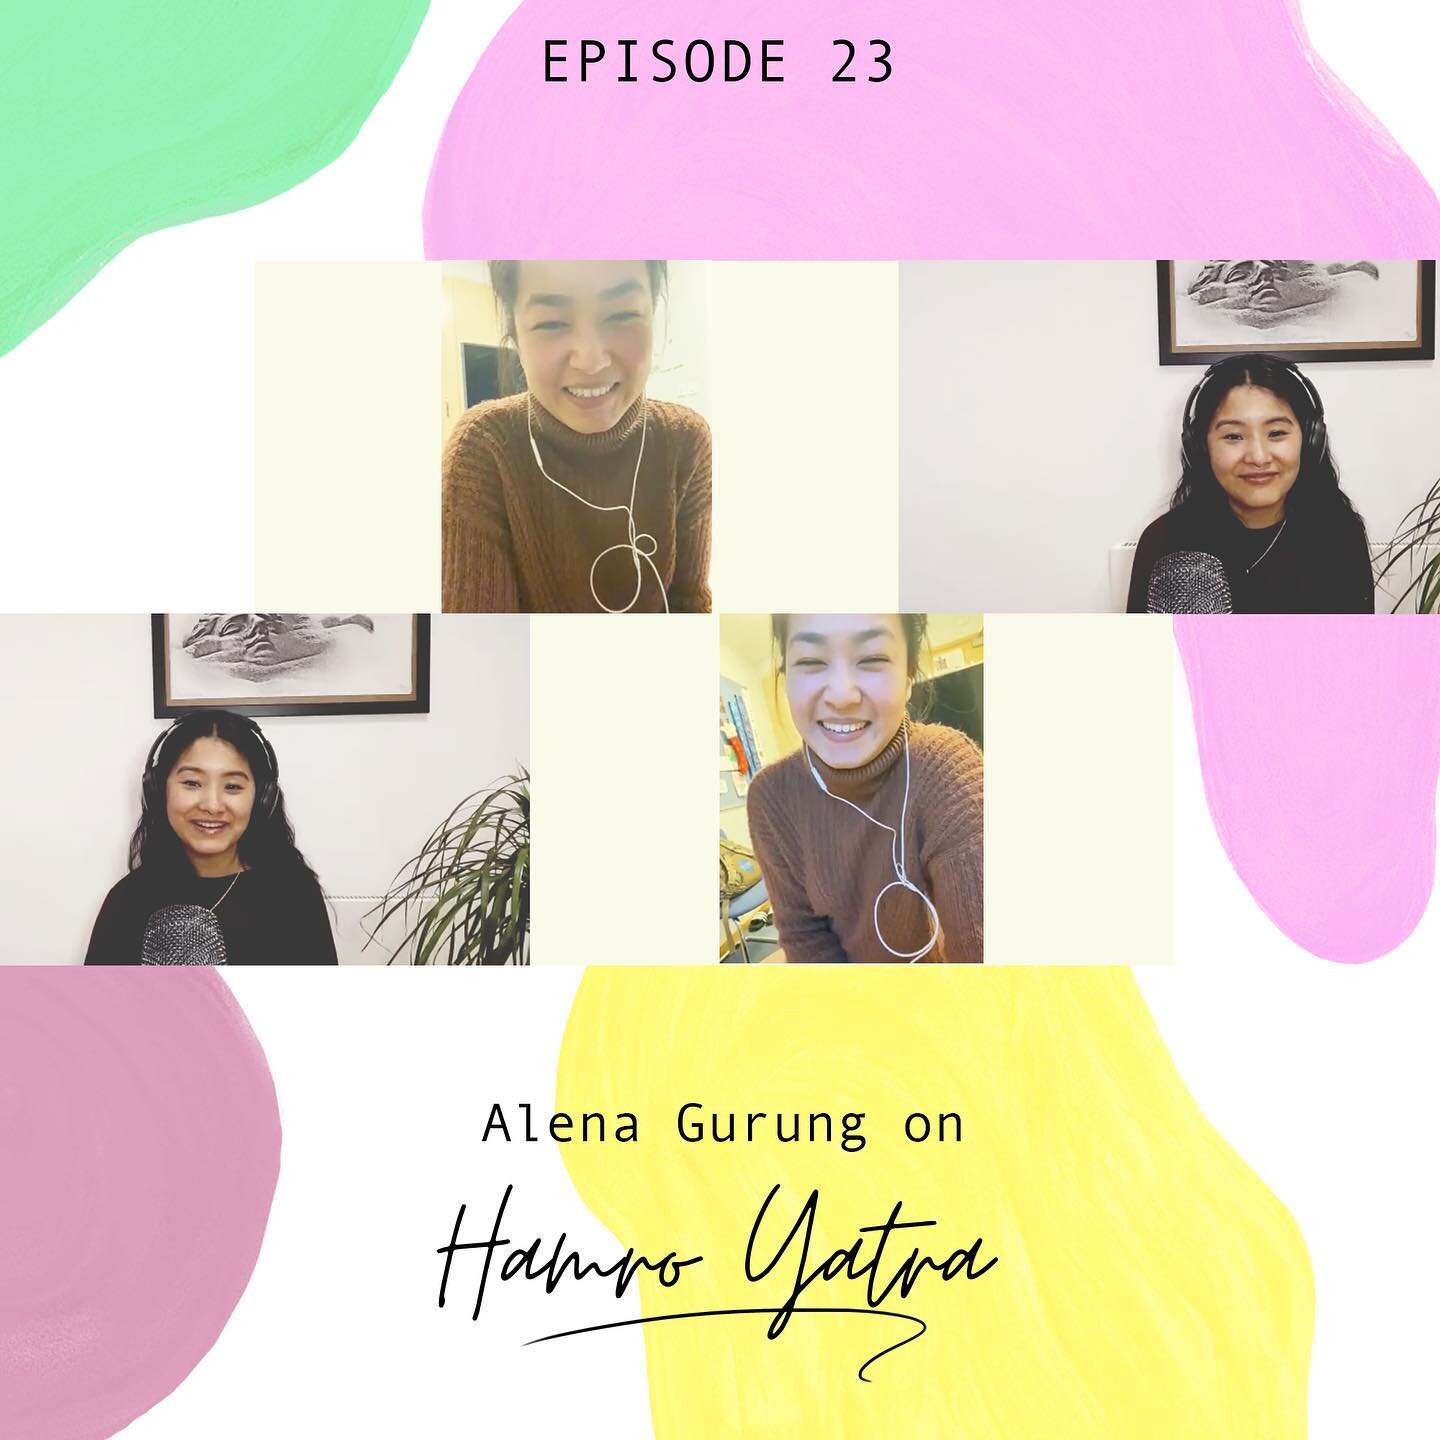 We&rsquo;re back with our regular schedule ✨ Episode 23 with @alenaxoxdoll is going live Friday 23rd April 🙌🏽 Follow us on ur favourite podcast platform!

@alenaxoxdoll is an example of what being a modern Nepali women in today&rsquo;s world is. Sh